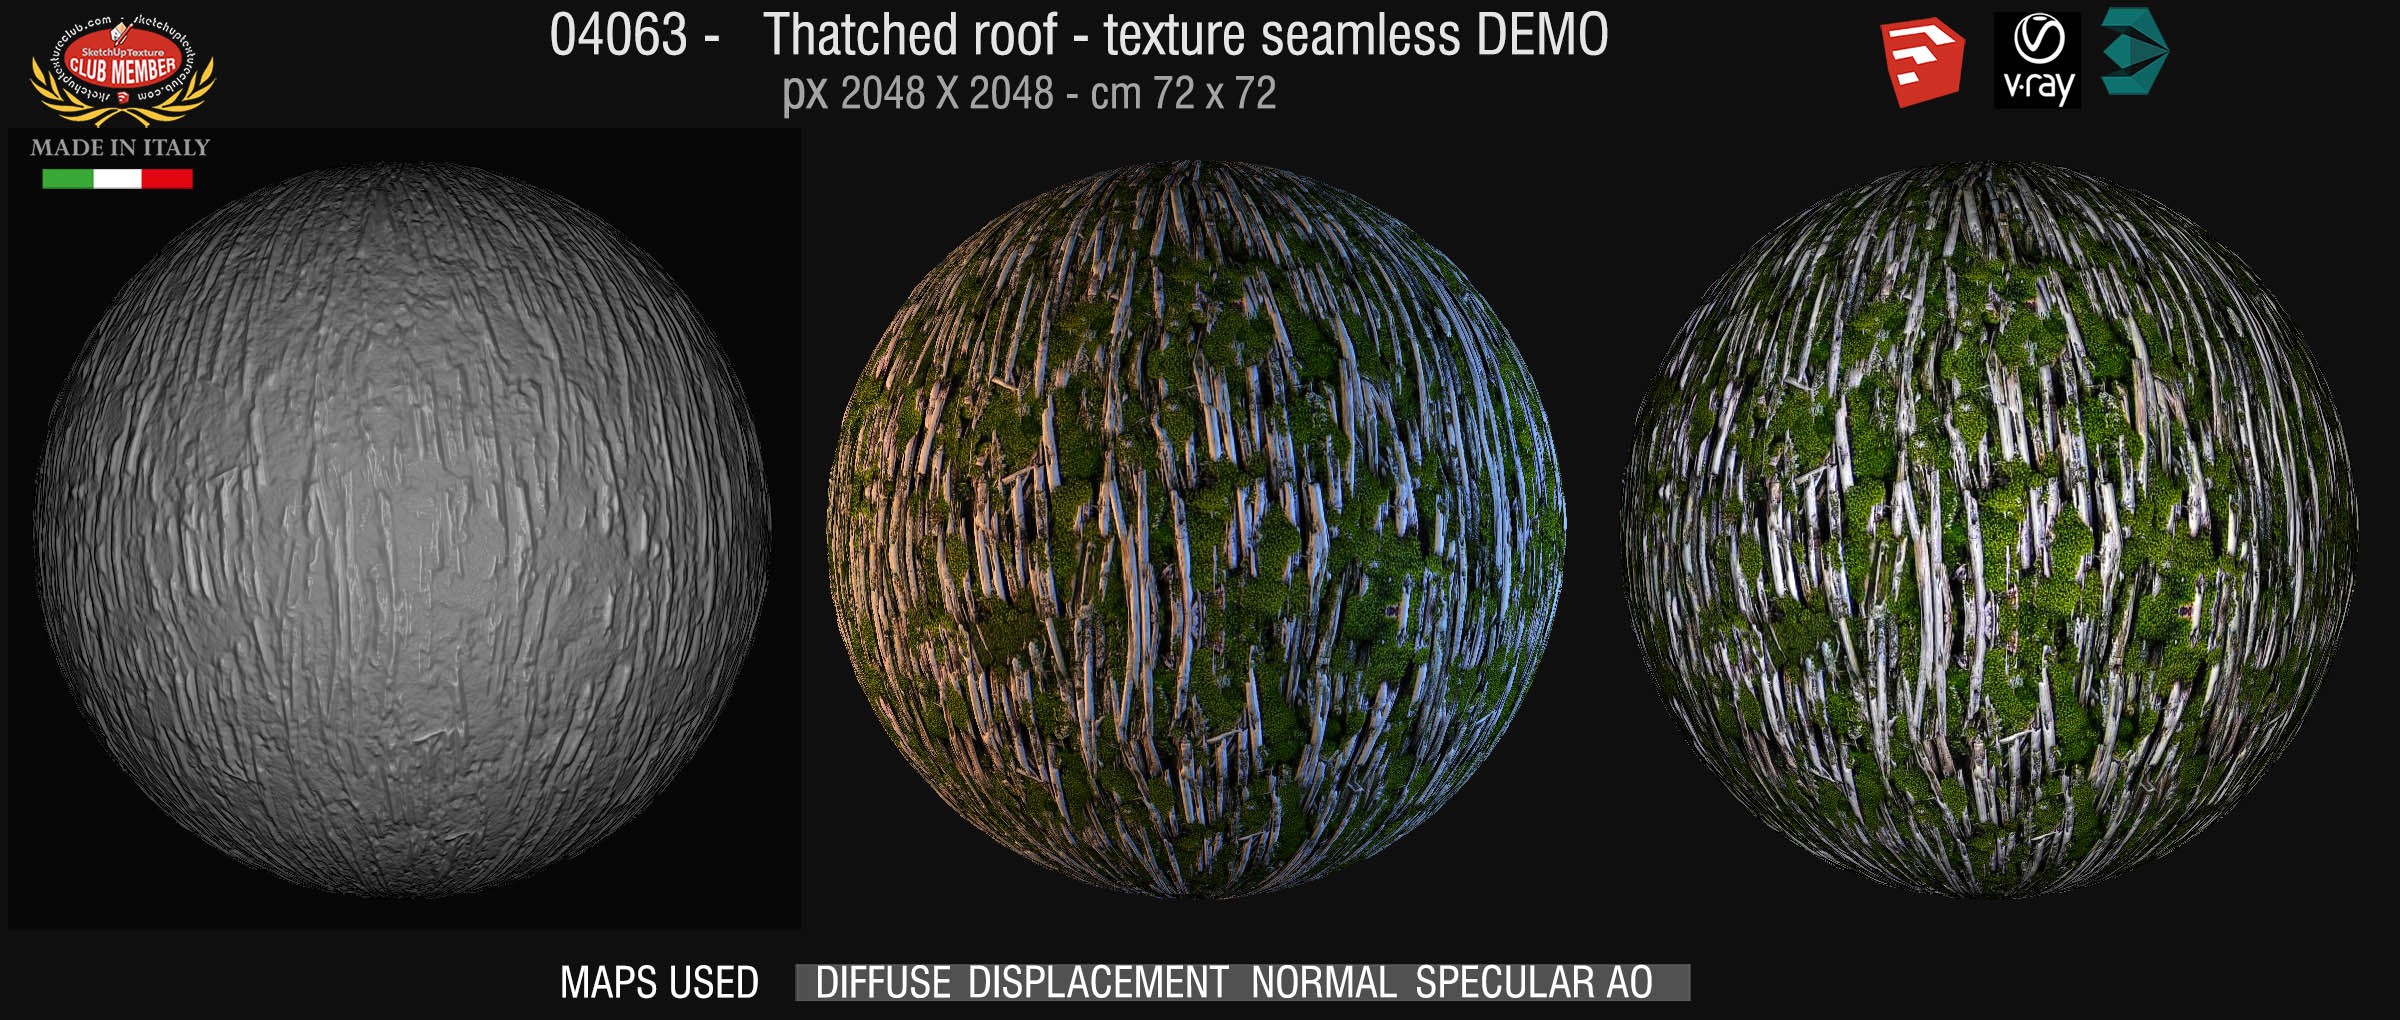 04063 Thatched roof texture seamless + maps DEMO